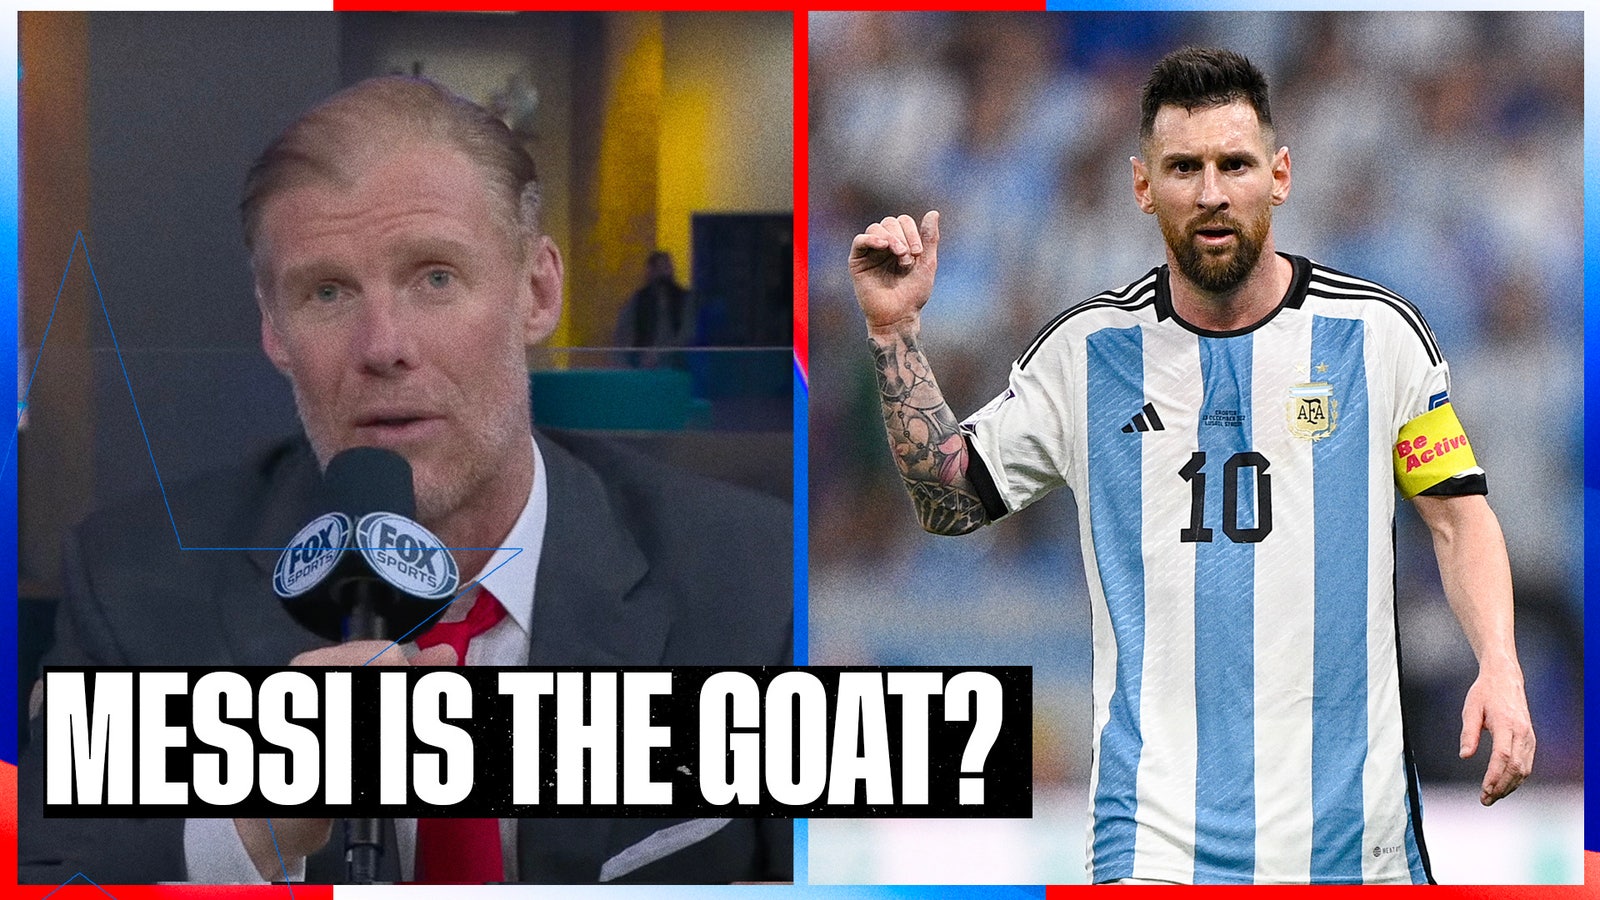 Argentina's Lionel Messi proved that he is the GOAT?